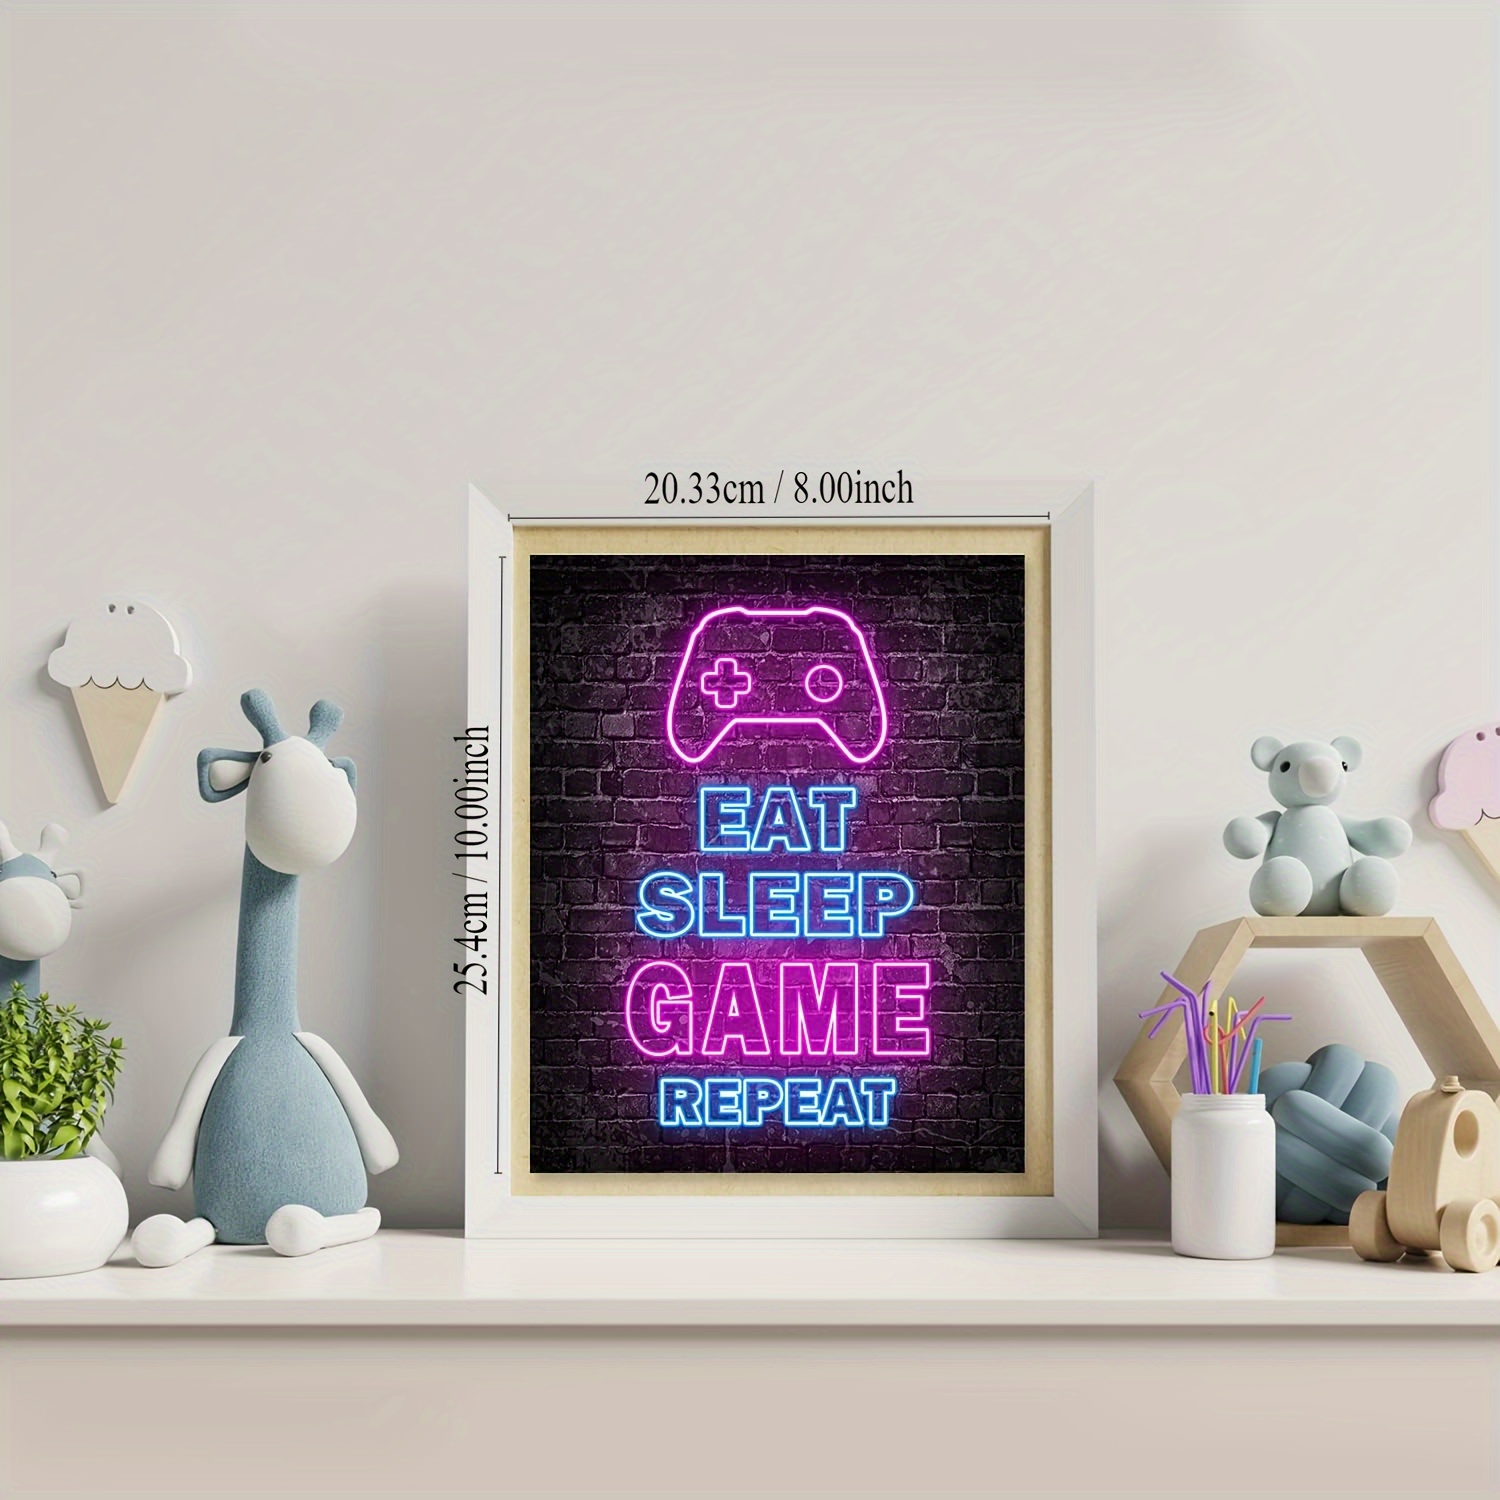 Printed Neon Gaming Posters Set of 4 (8”X 10”), Boys Room Decorations for  Bedroom,Video Game Wall Art,Gamer, Teen boy bedroom, game room, No Frames